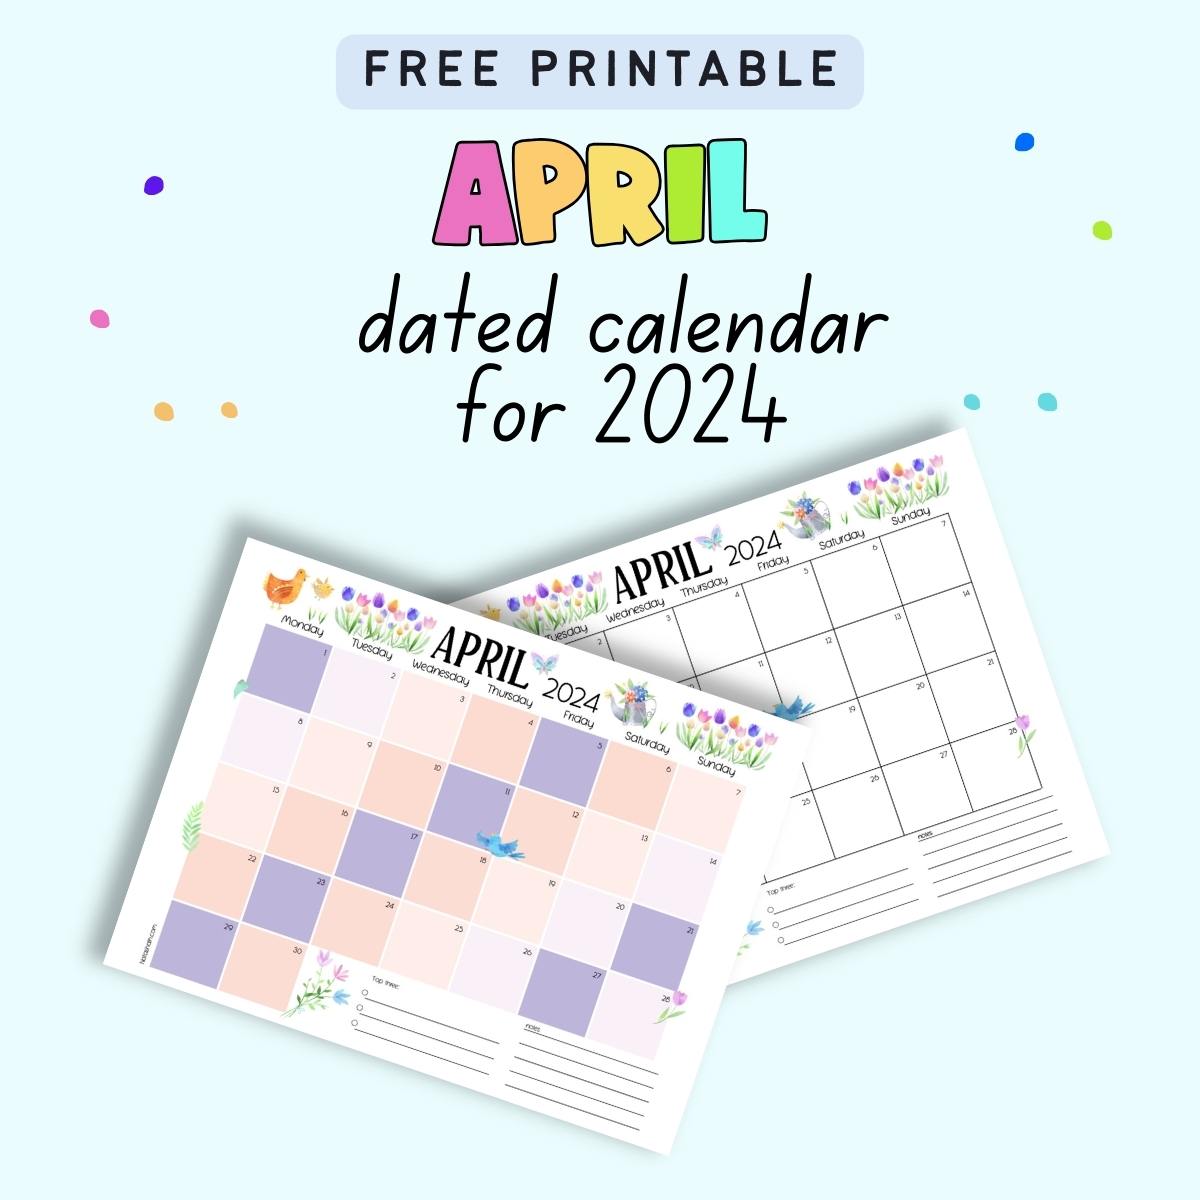 Text "free printable April dated calendar for 2024" with a preview of two dated calendar pages for April 2024